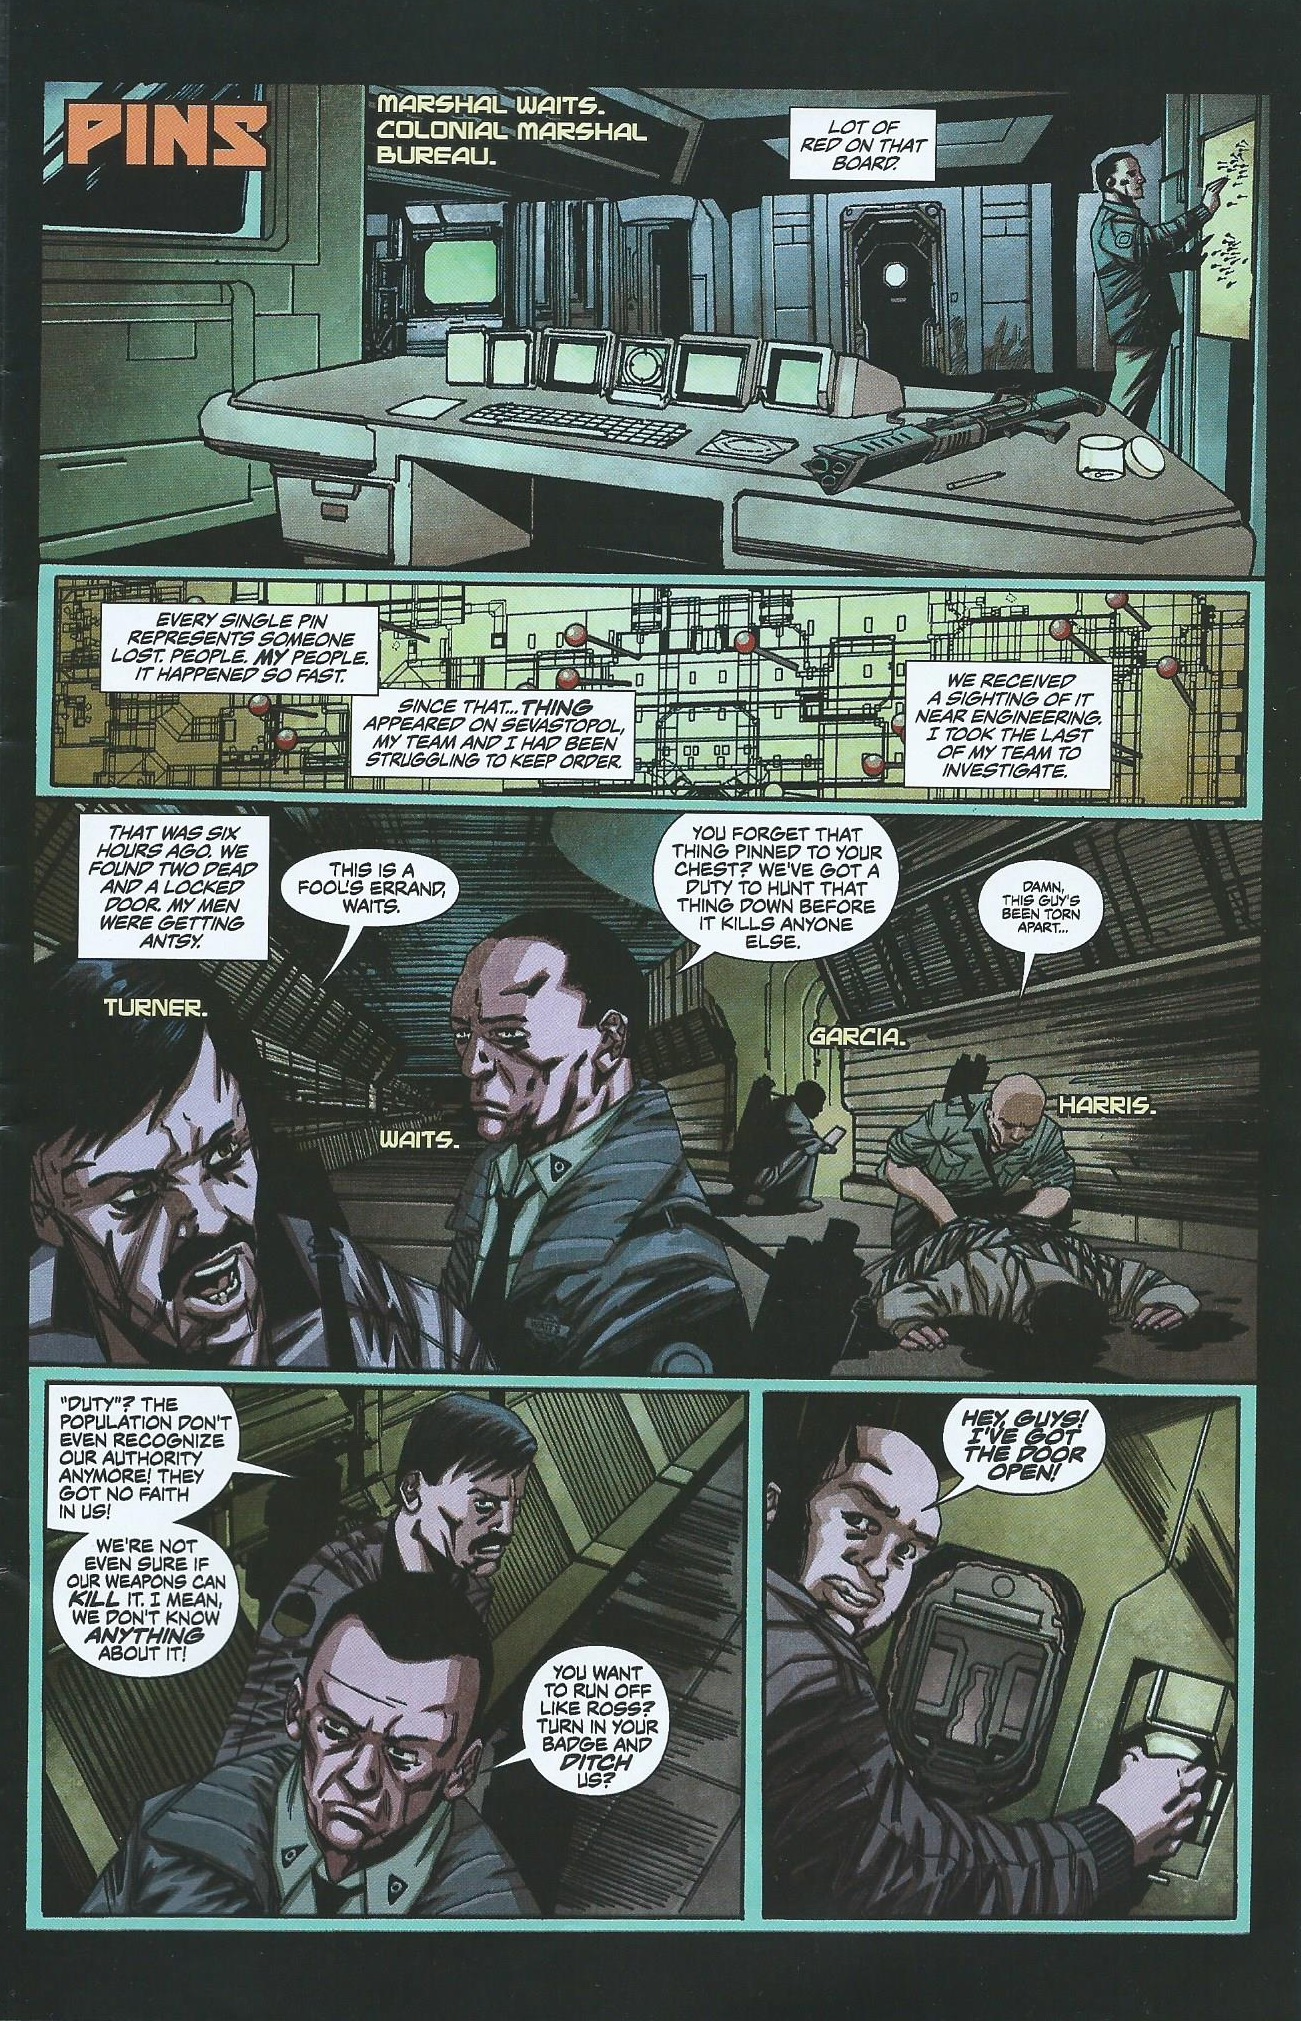 Alien Isolation Full | Read Alien Isolation Full comic online in high  quality. Read Full Comic online for free - Read comics online in high  quality .| READ COMIC ONLINE